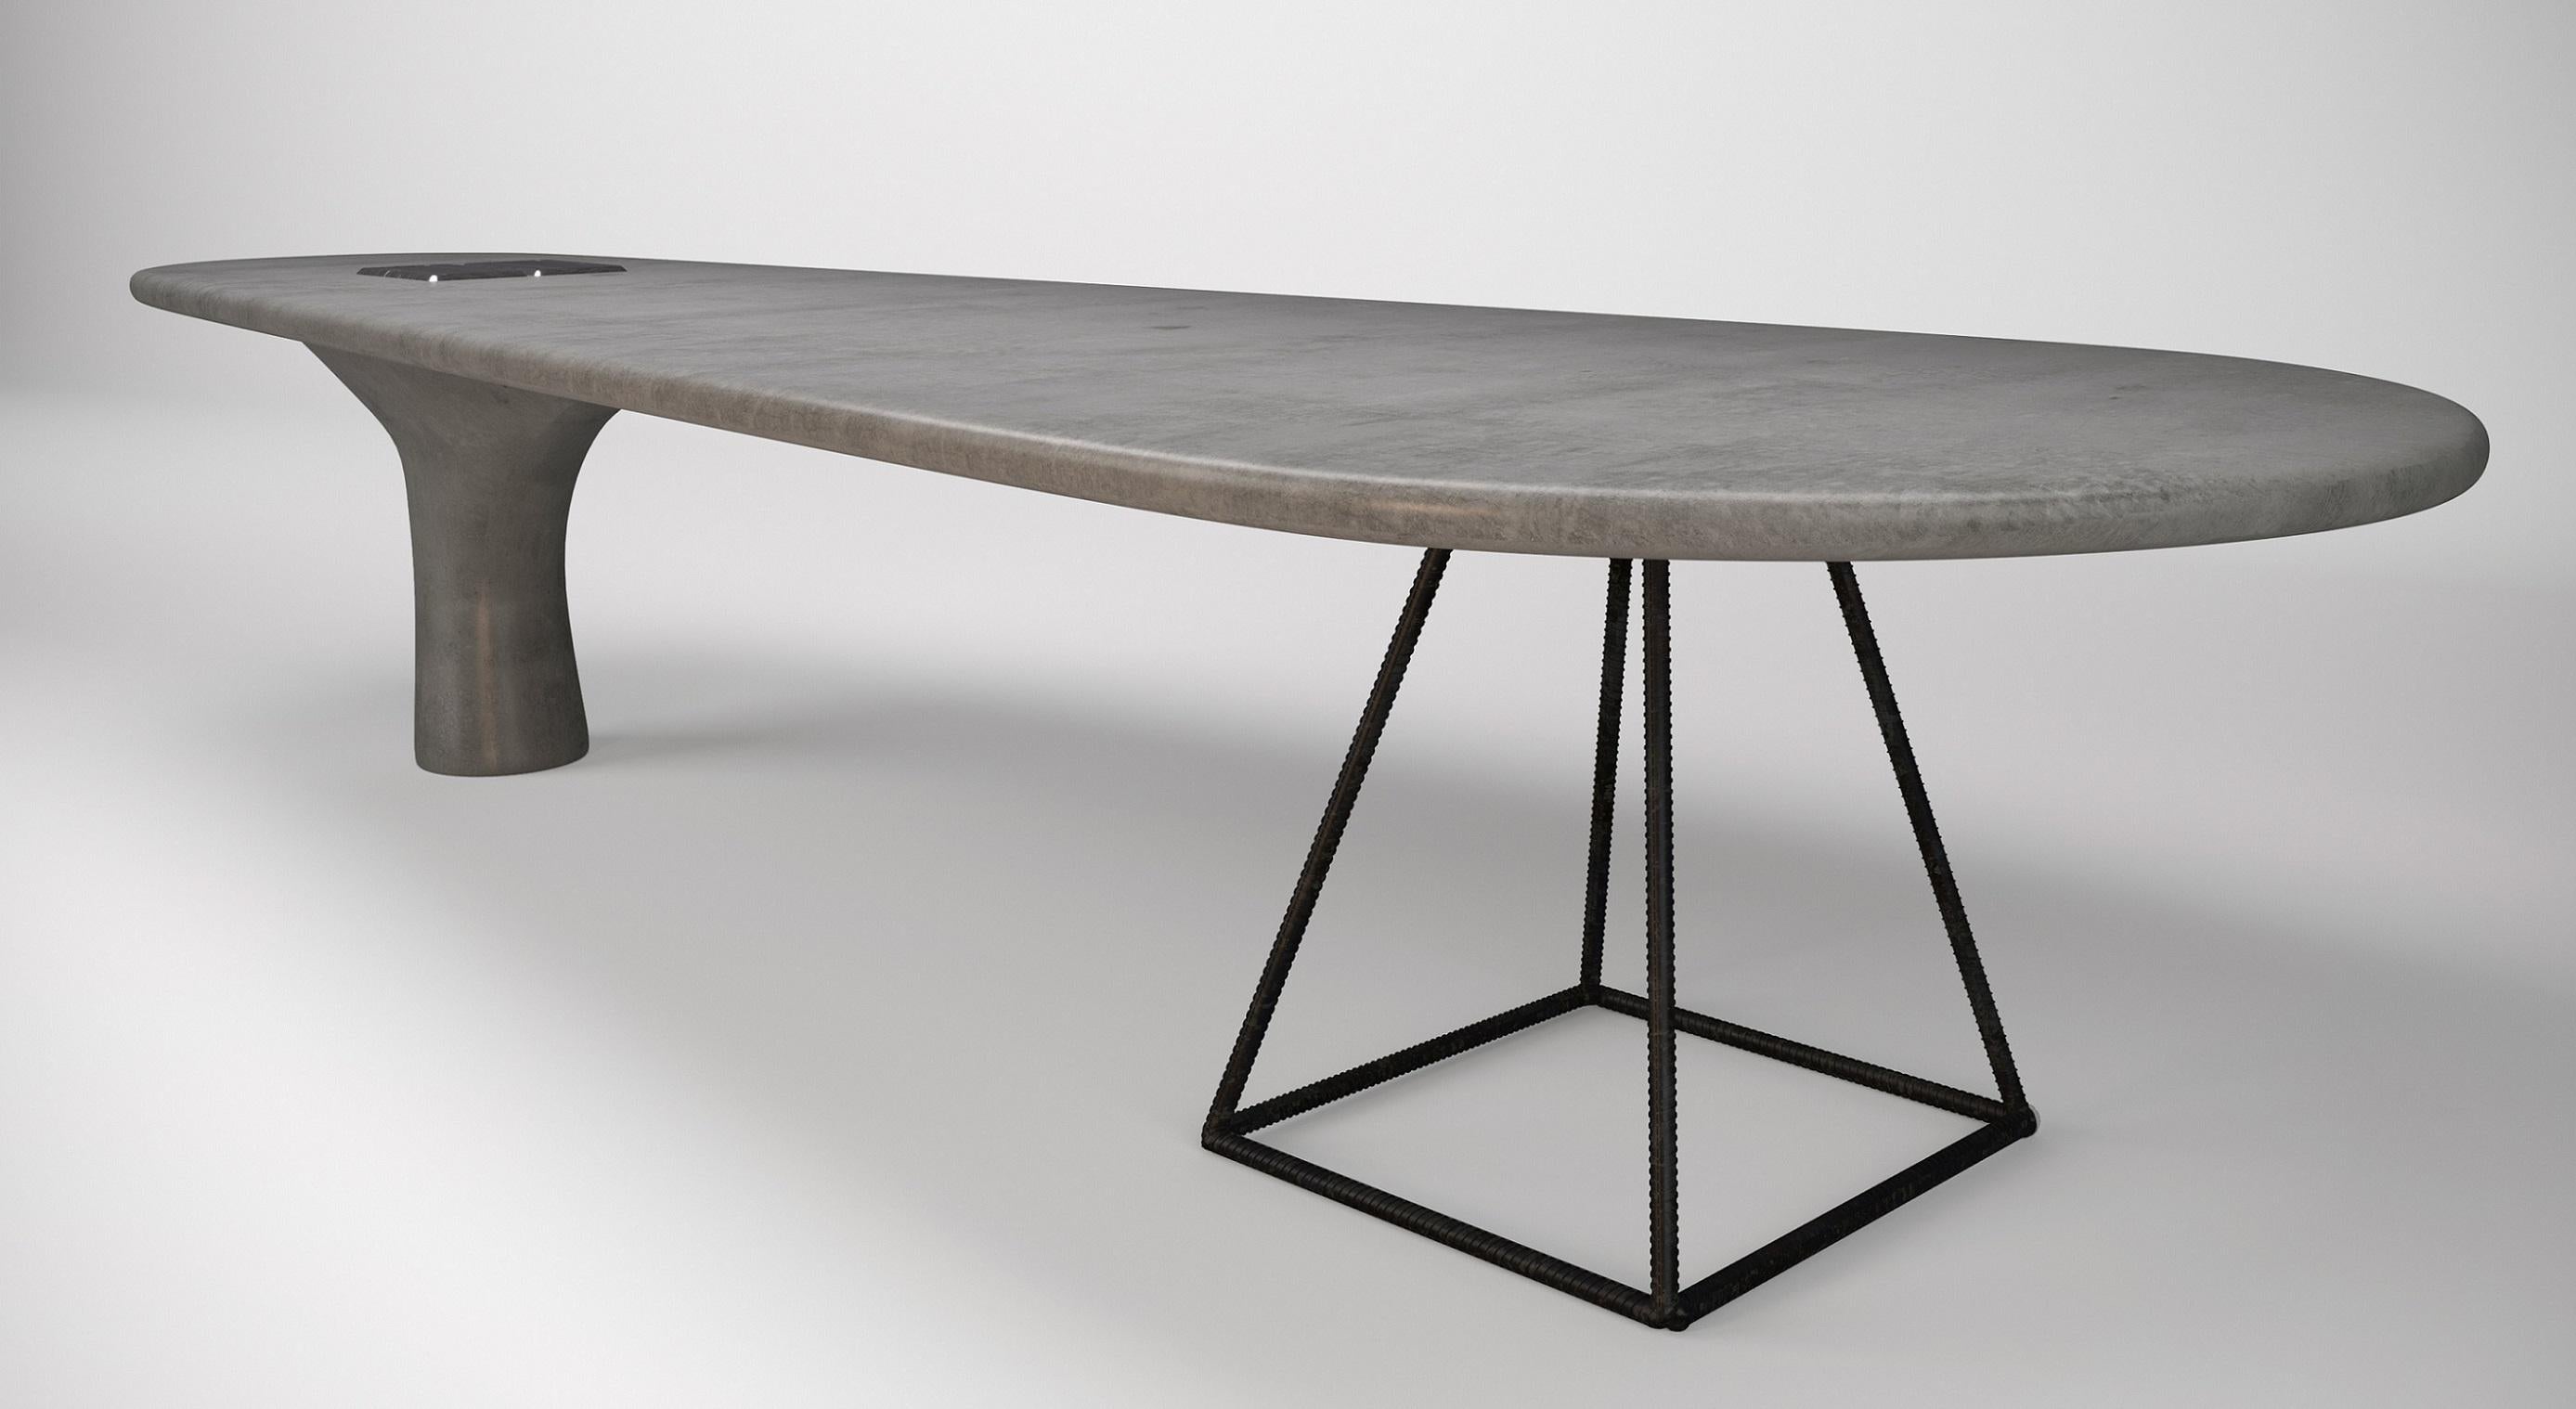 Designer Solmaz Fooladi continues to reveal new aesthetic and technological qualities of concrete, creating a table «Drops of concrete». In fact, the table is made of fiberglass, which significantly reduces the weight of the seemingly massive